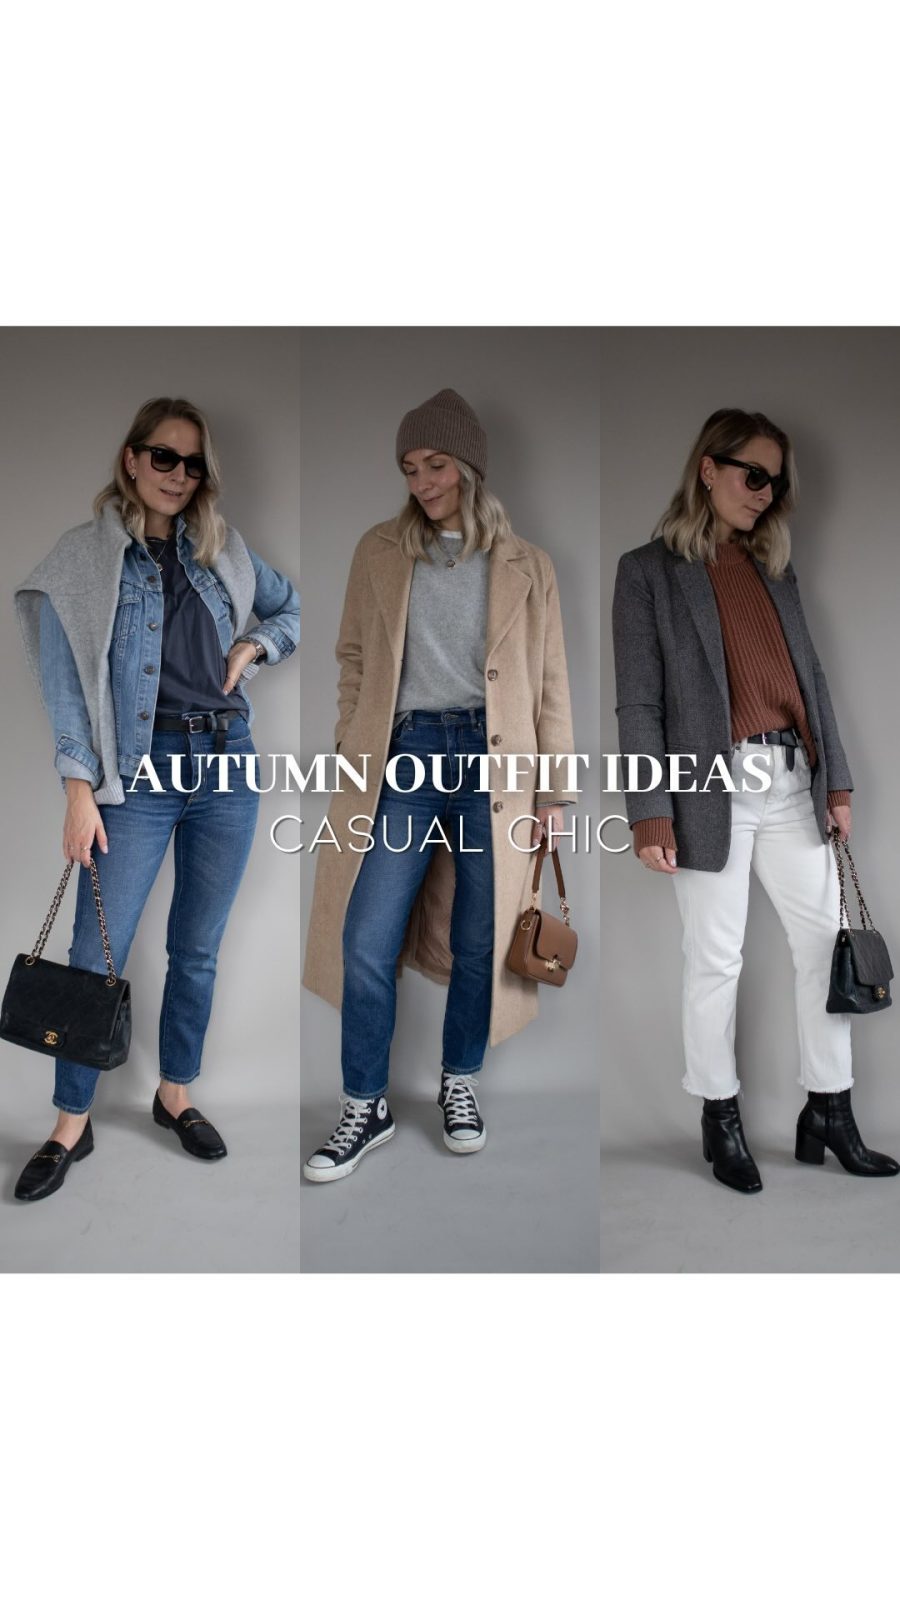 Casual autumn capsule outfit ideas 🍂 My personal fave is that all denim look, you guys know I’m a sucker for all things blue 💙⁠
⁠
(Jeans are new from @armedangels, everything else are all old faves 💘 The overshirt is a hand-me-down @everlane number from my husband, it adds warmth and I think it looks quite cool as an extra layer under the coat!)